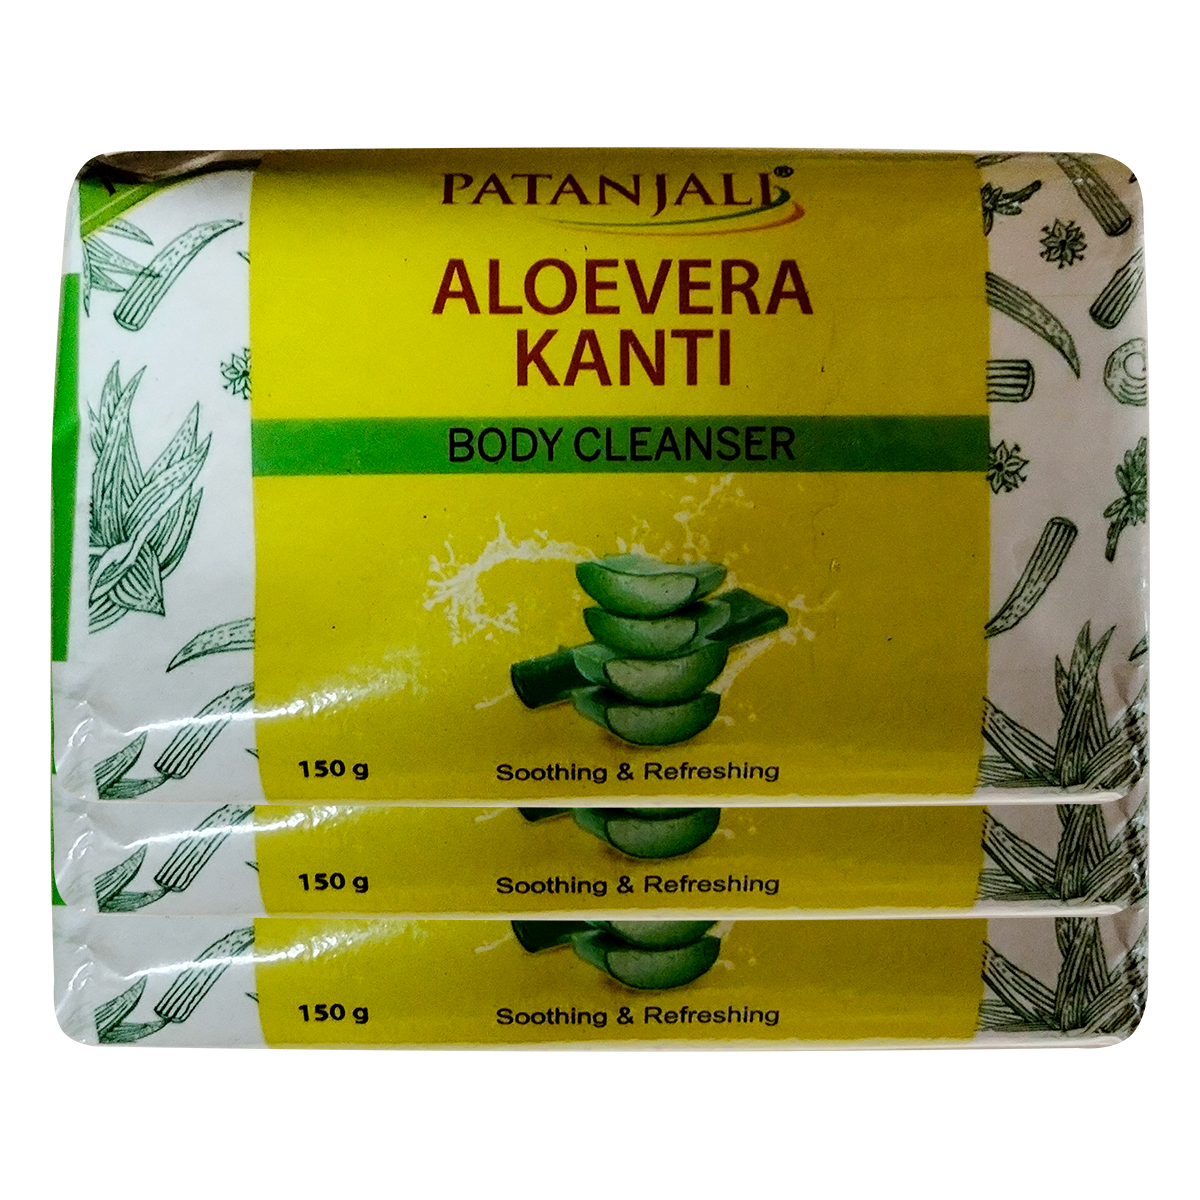 Patanjali Aloevera Kanti Body Cleanser Monthly Pack